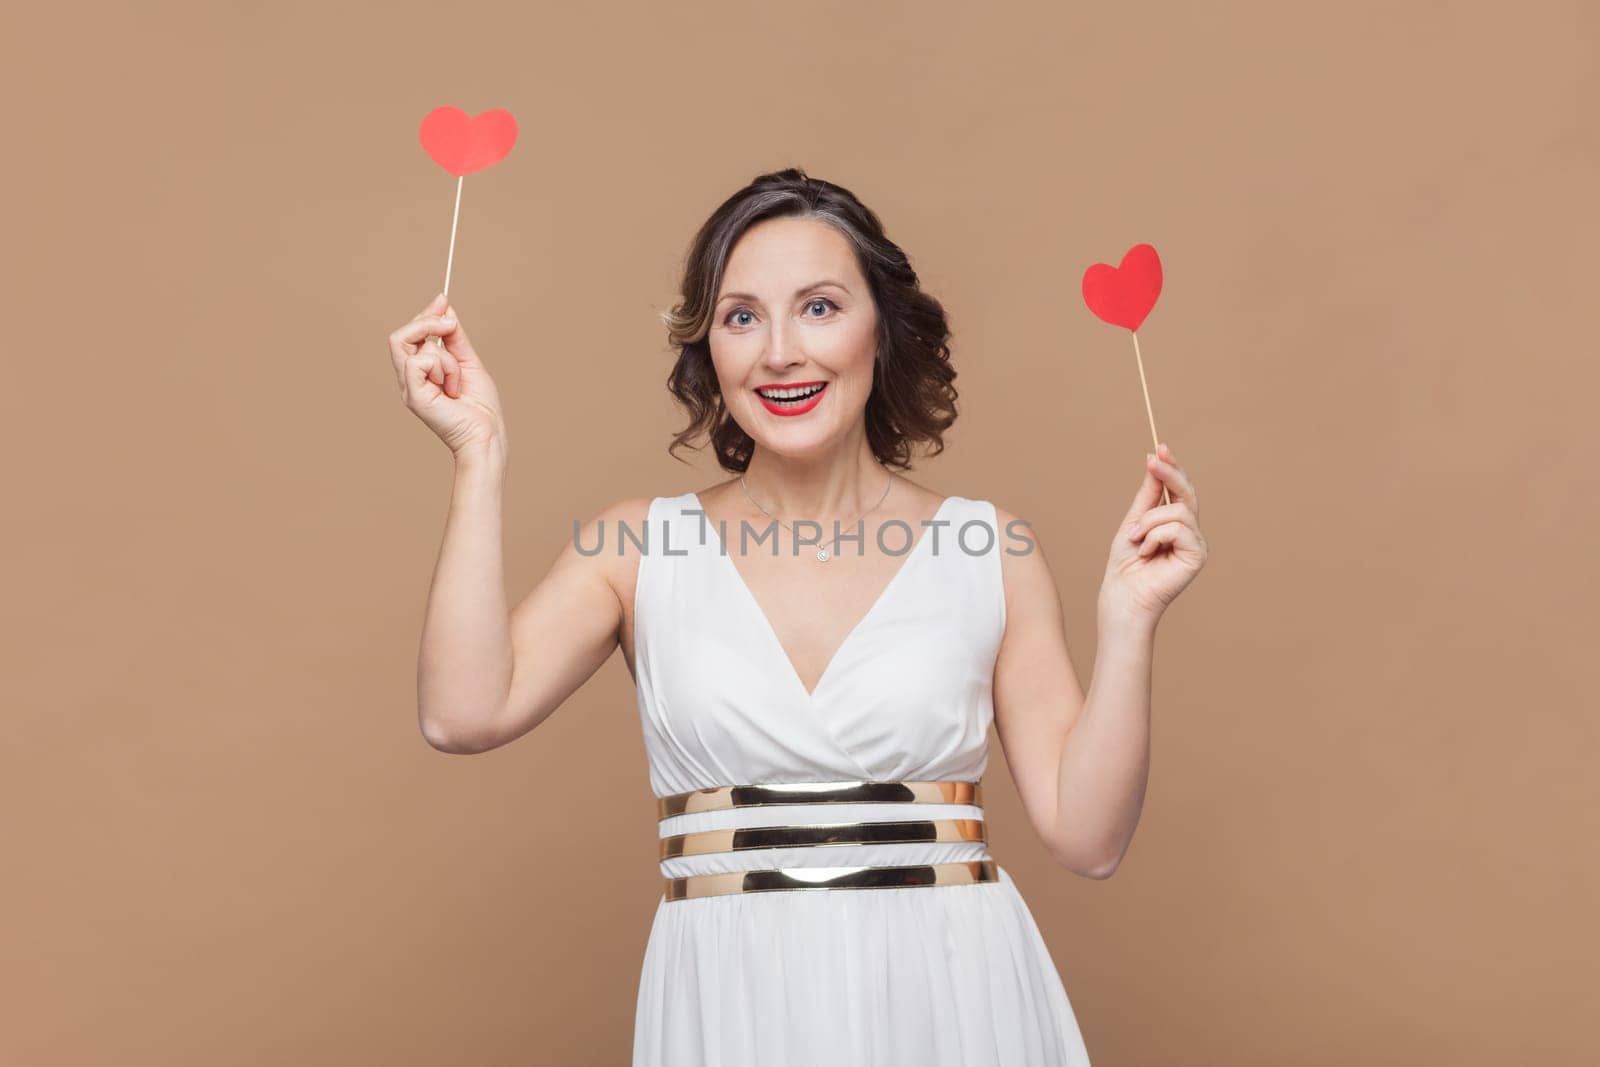 Portrait of excited positive middle aged woman with wavy hair holding little red hearts, smiling happily, celebrating, wearing white dress. Indoor studio shot isolated on light brown background.